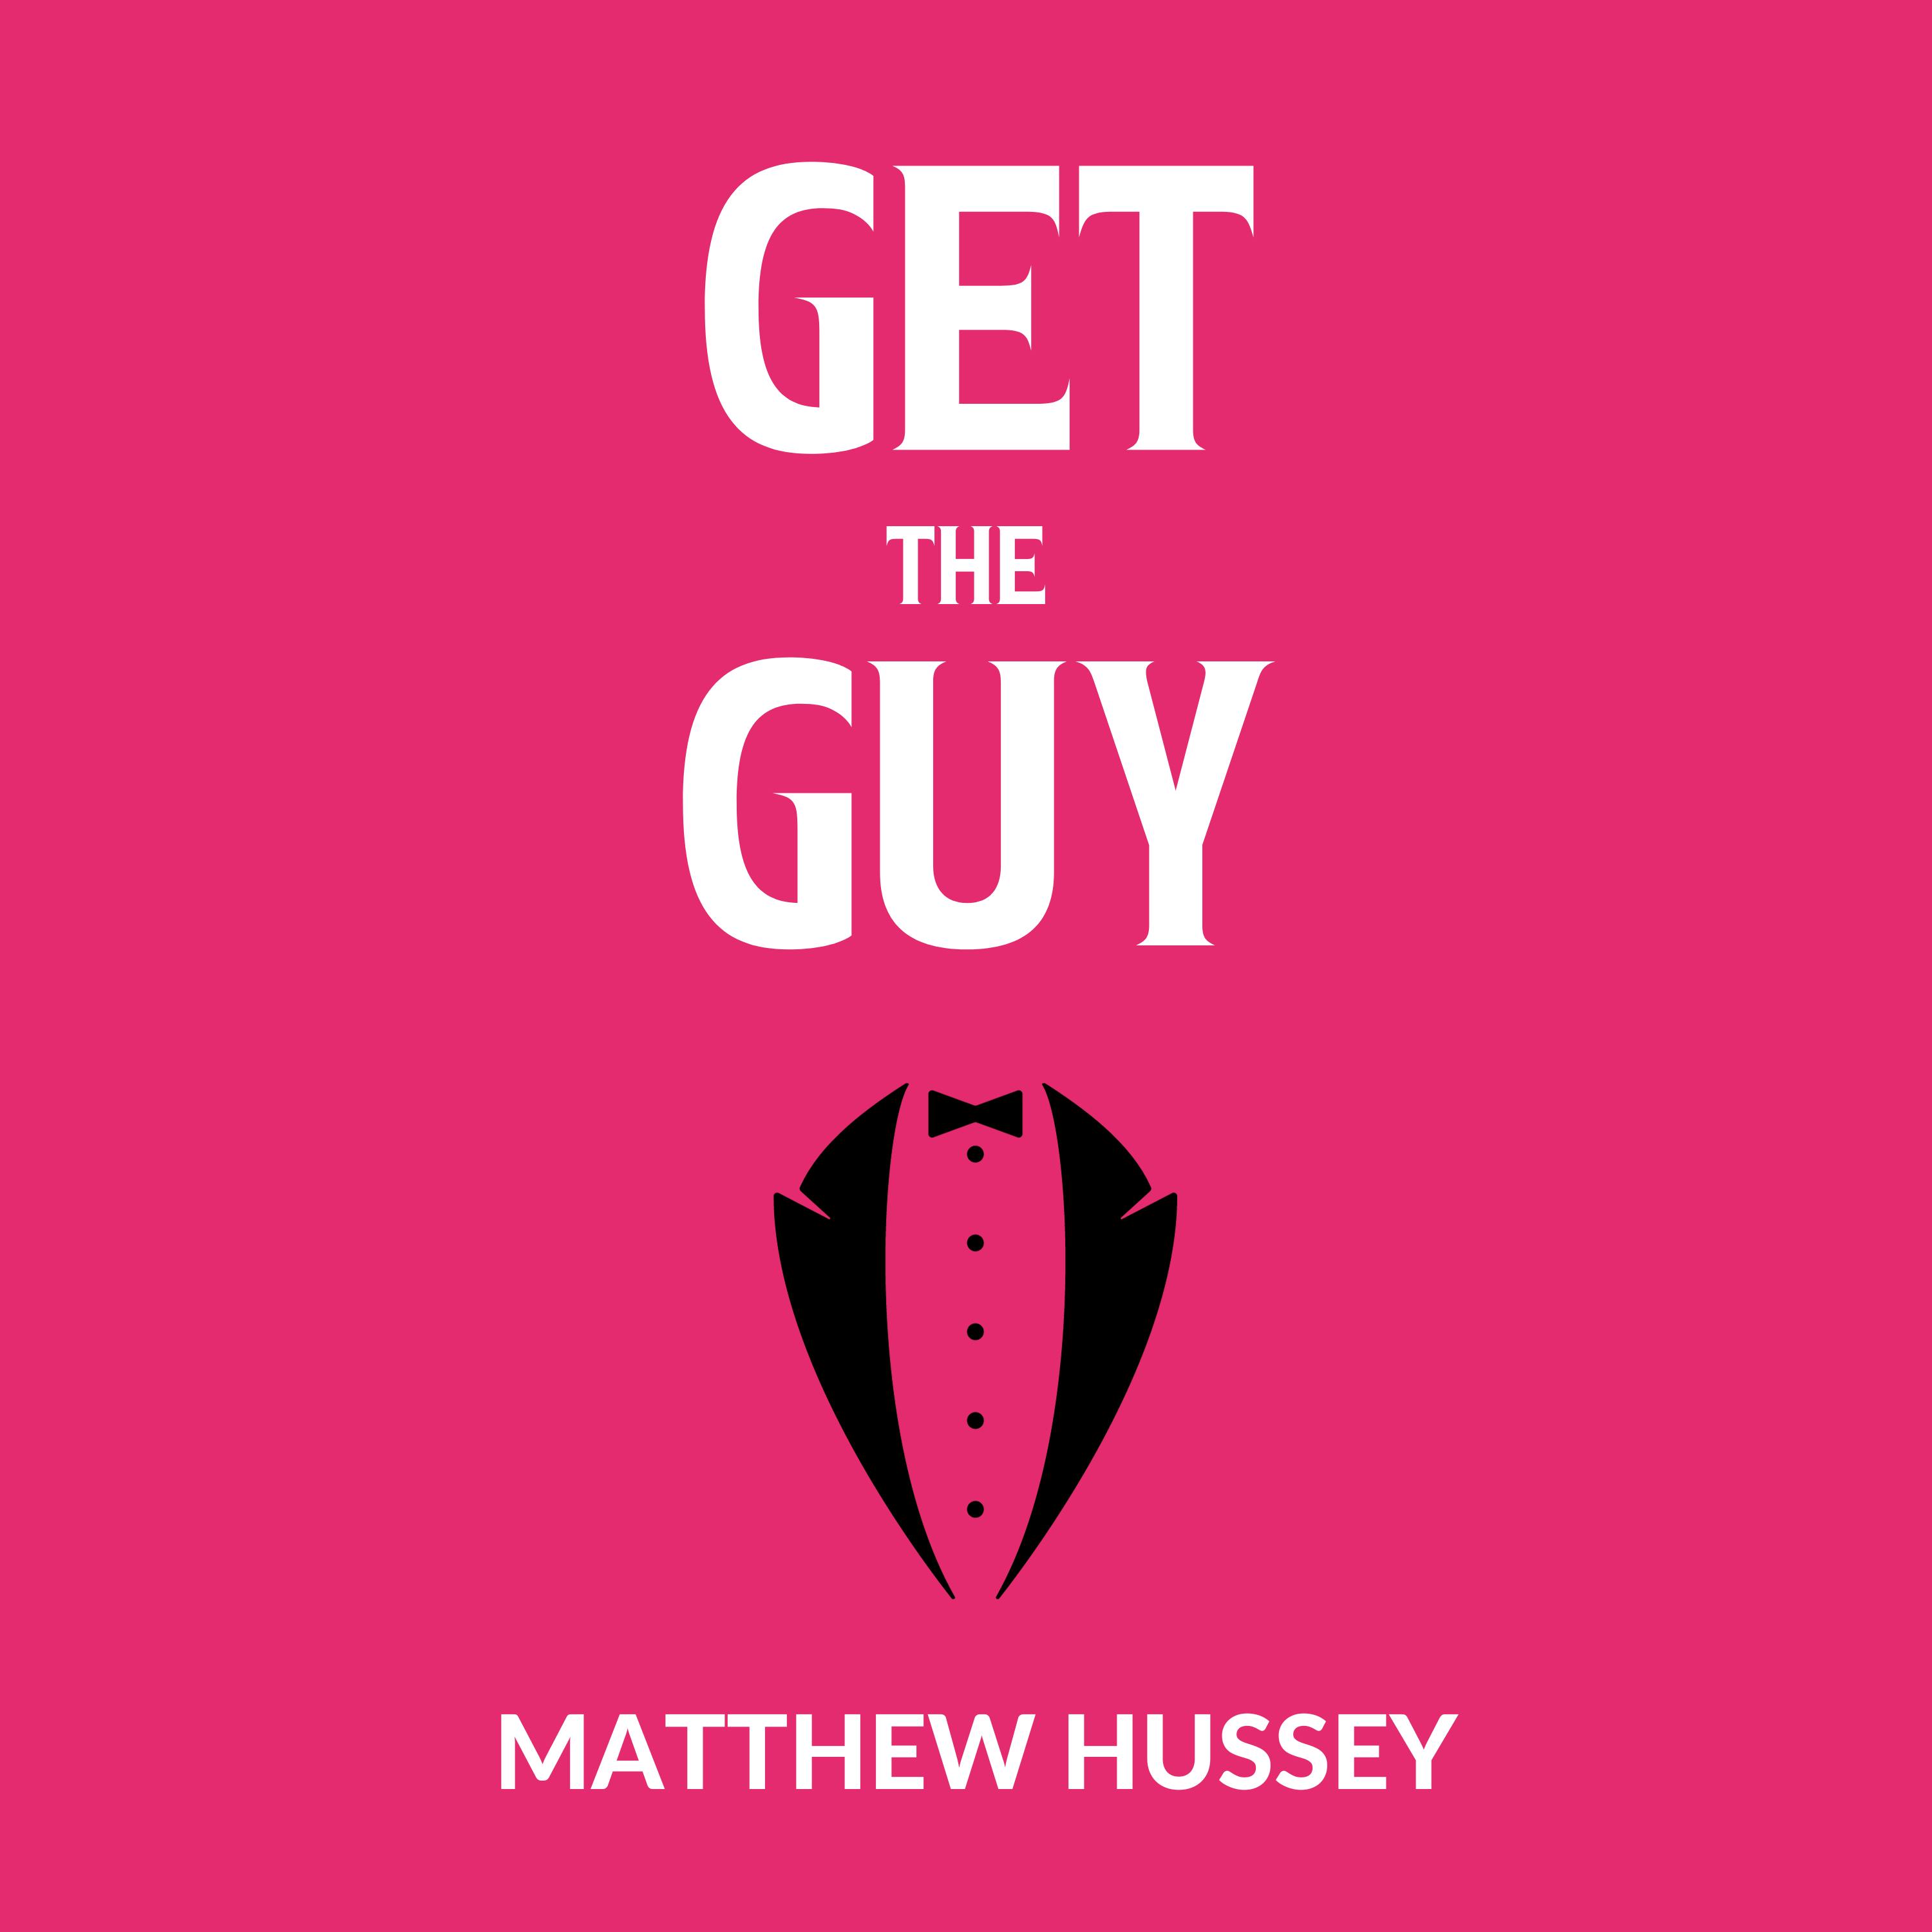 Get The Guy Summary | Book by Matthew Hussey | Free Audiobook